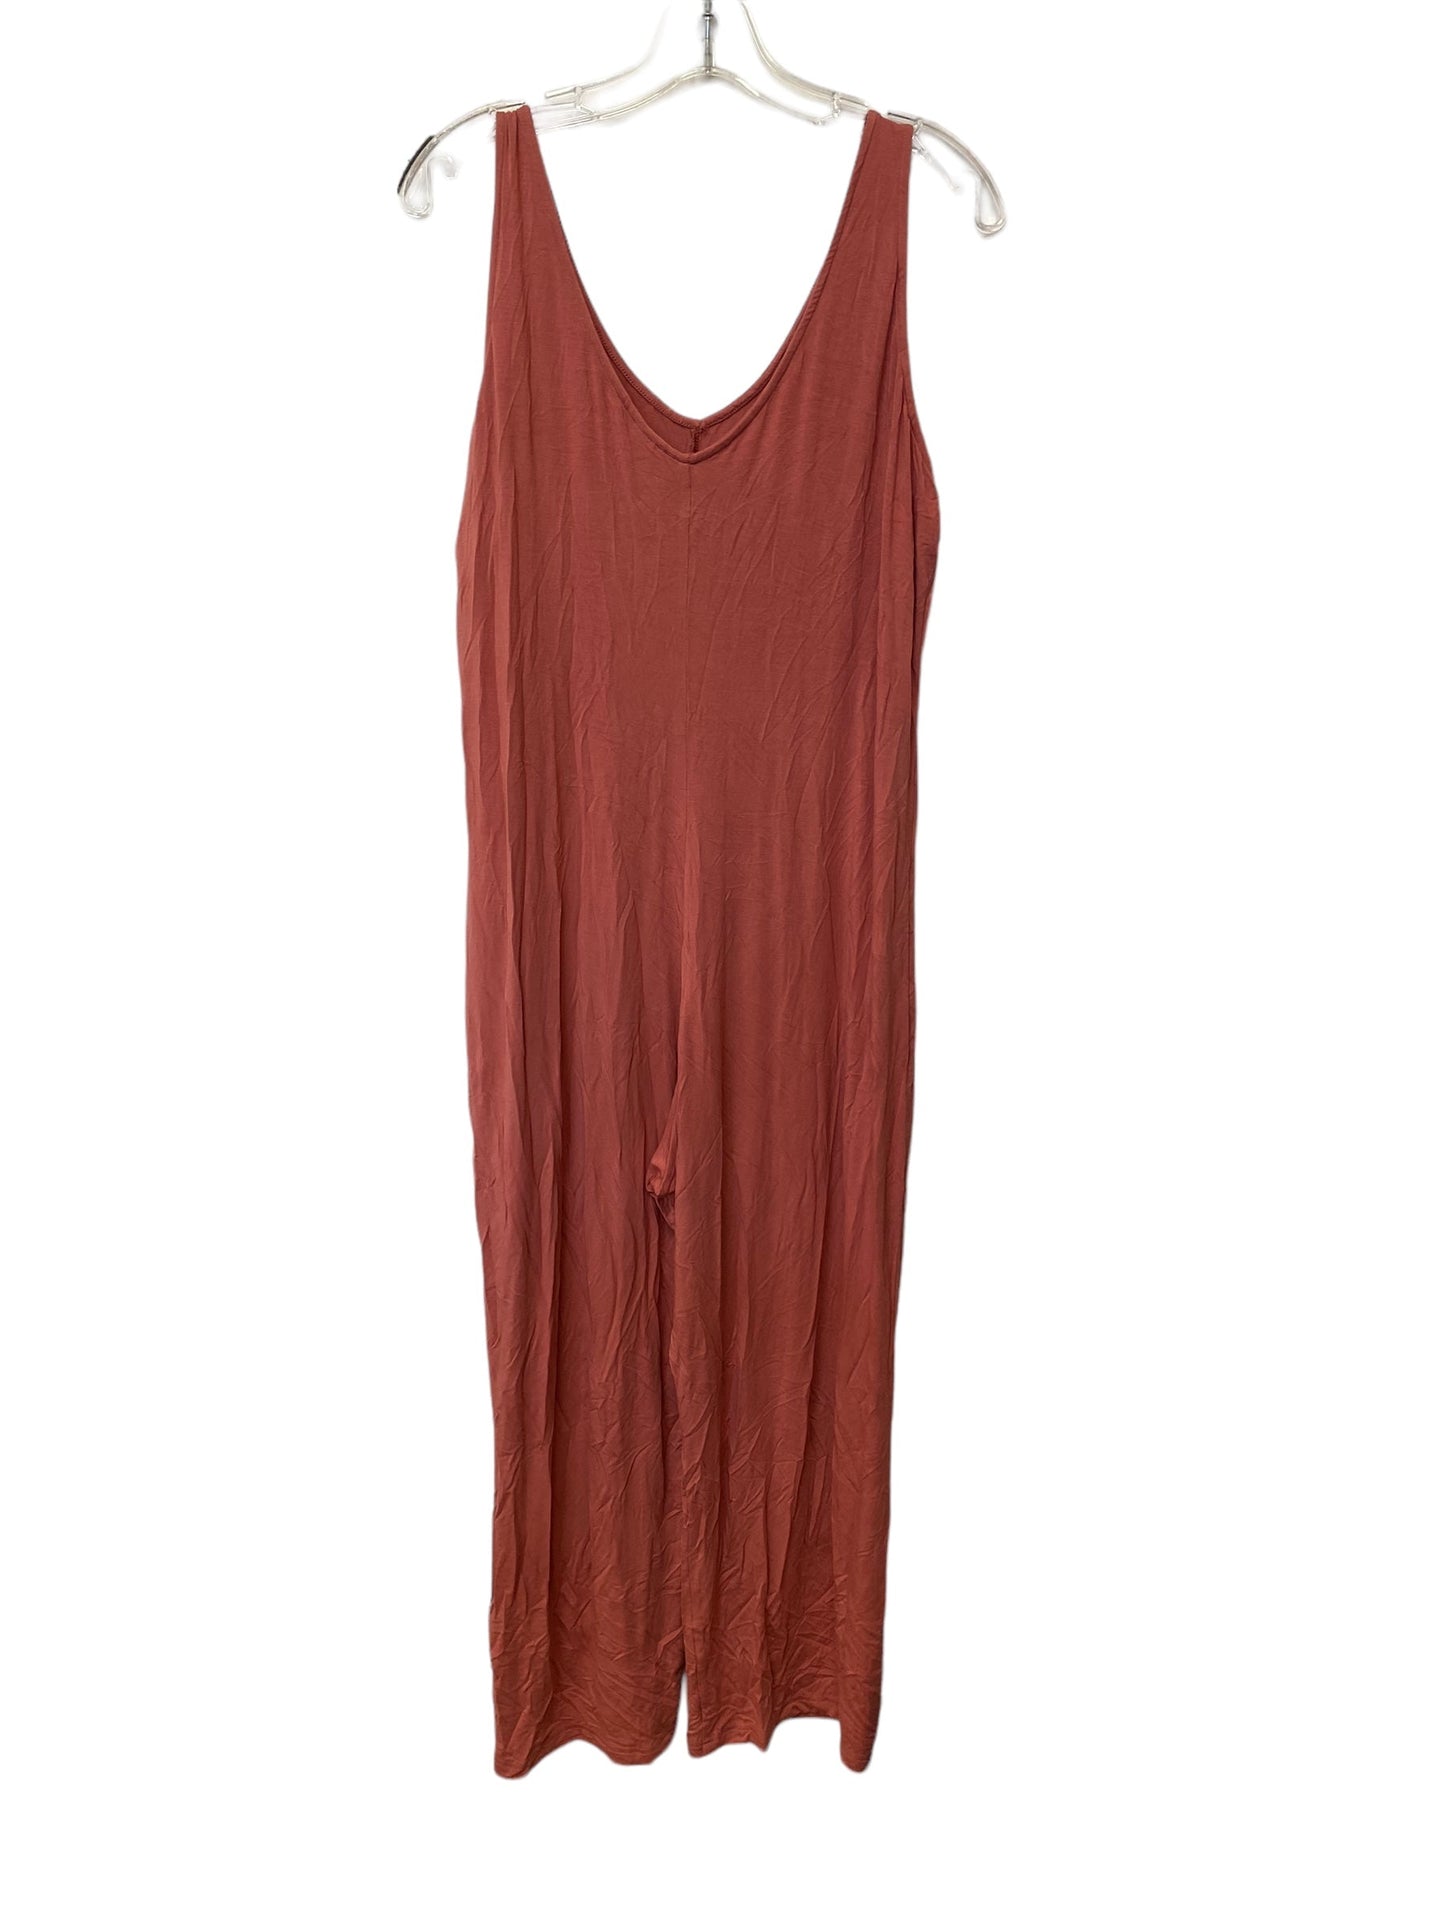 Red Jumpsuit Old Navy, Size M